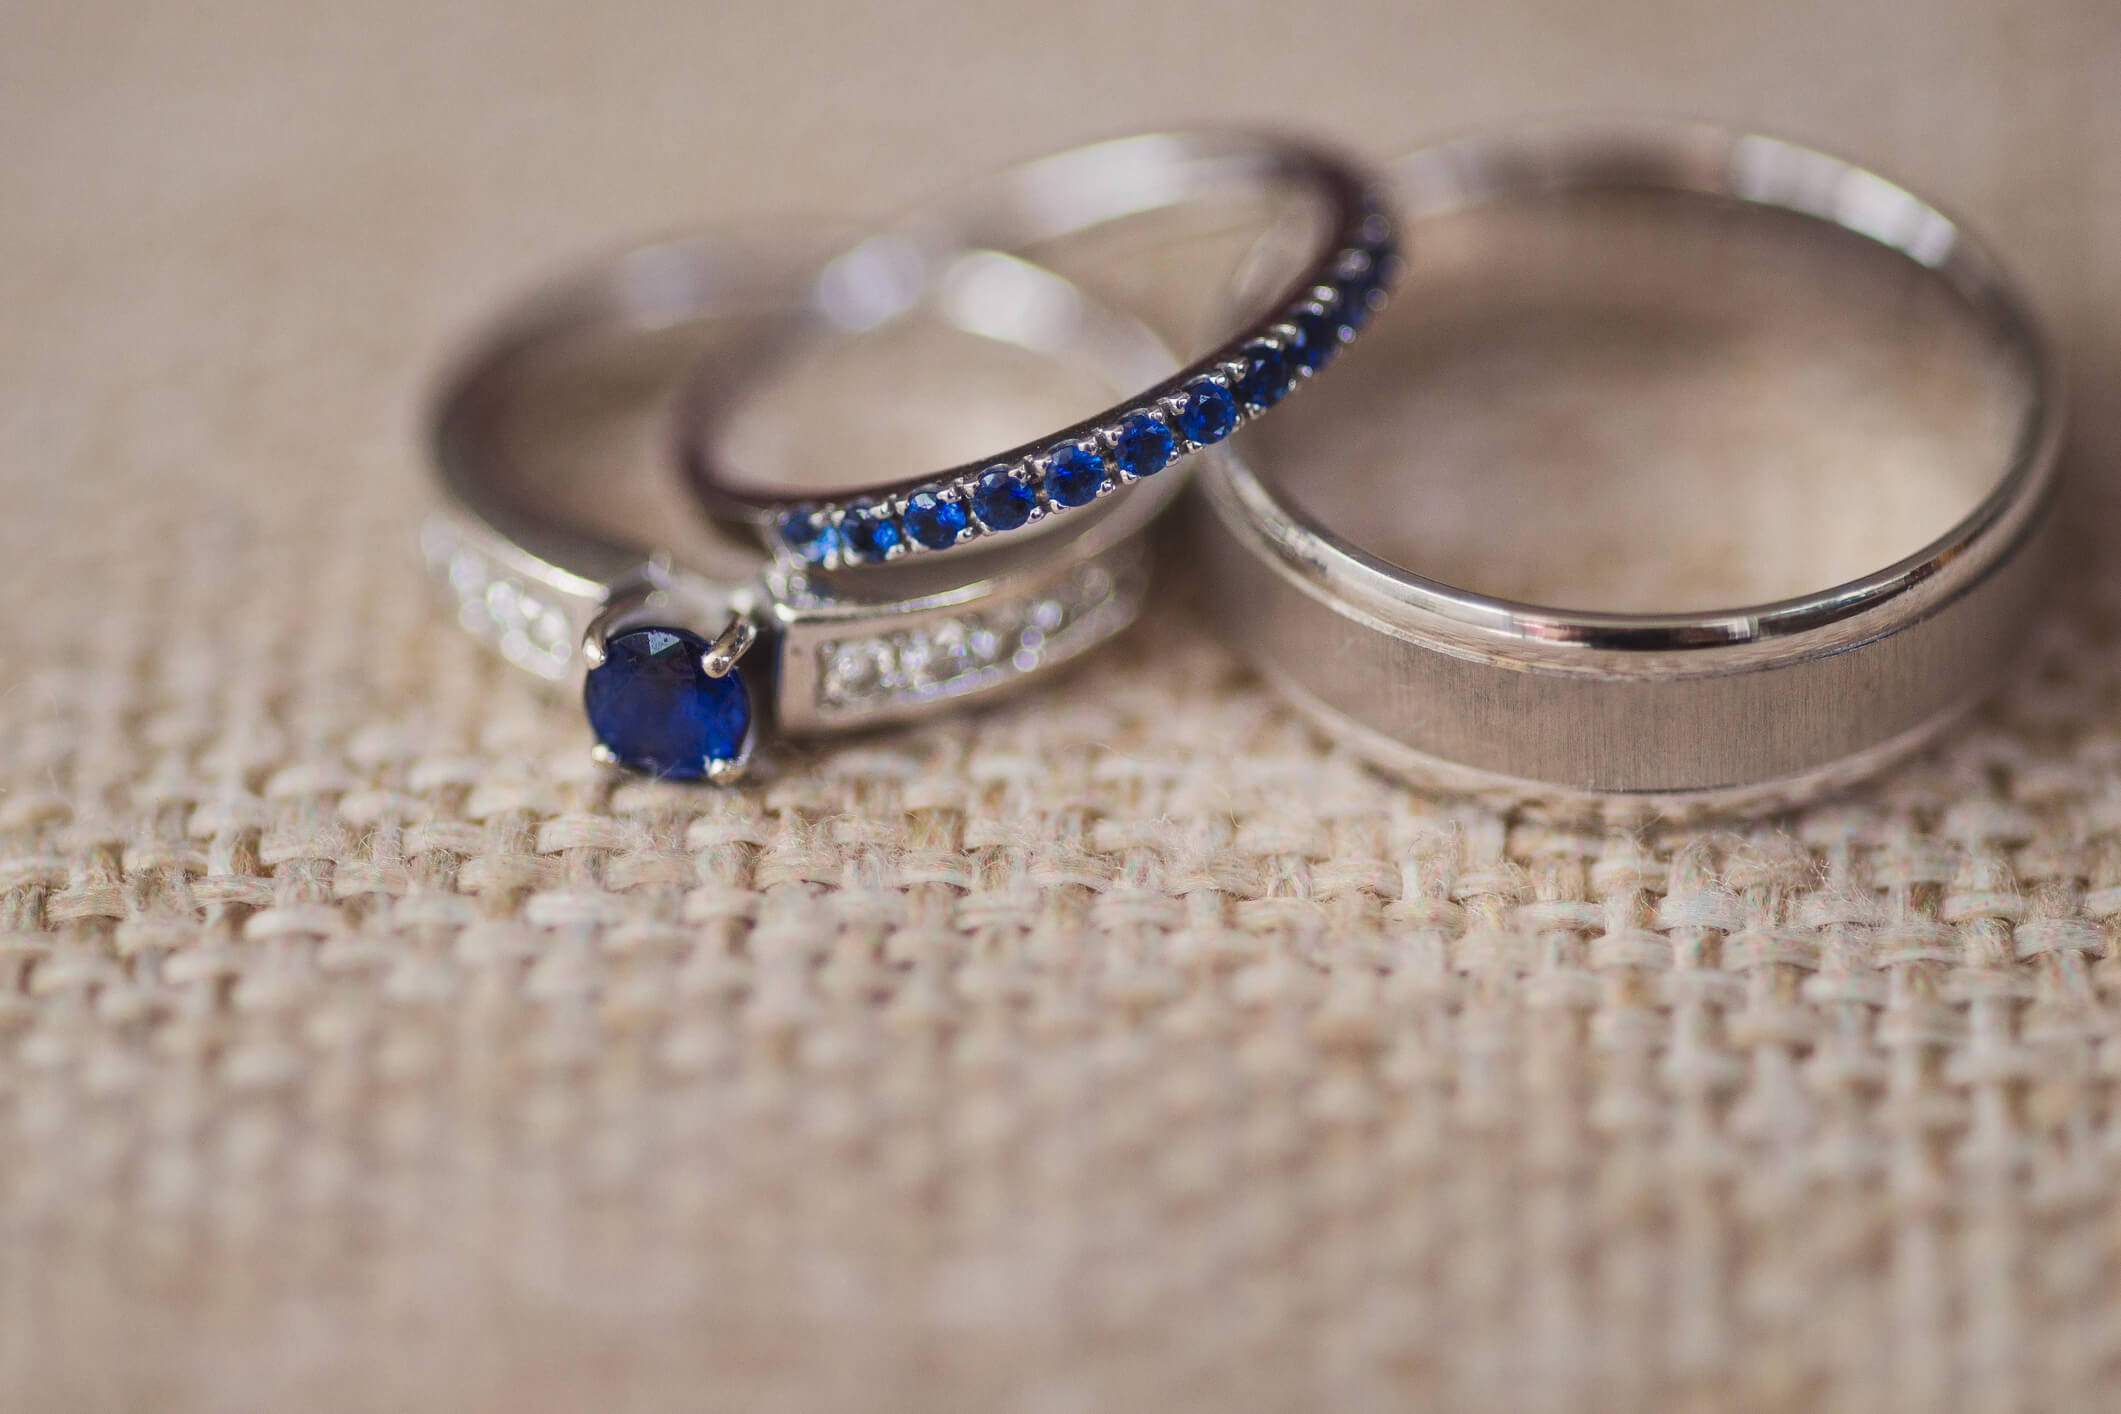 What You Should Know About Cobalt Wedding Bands